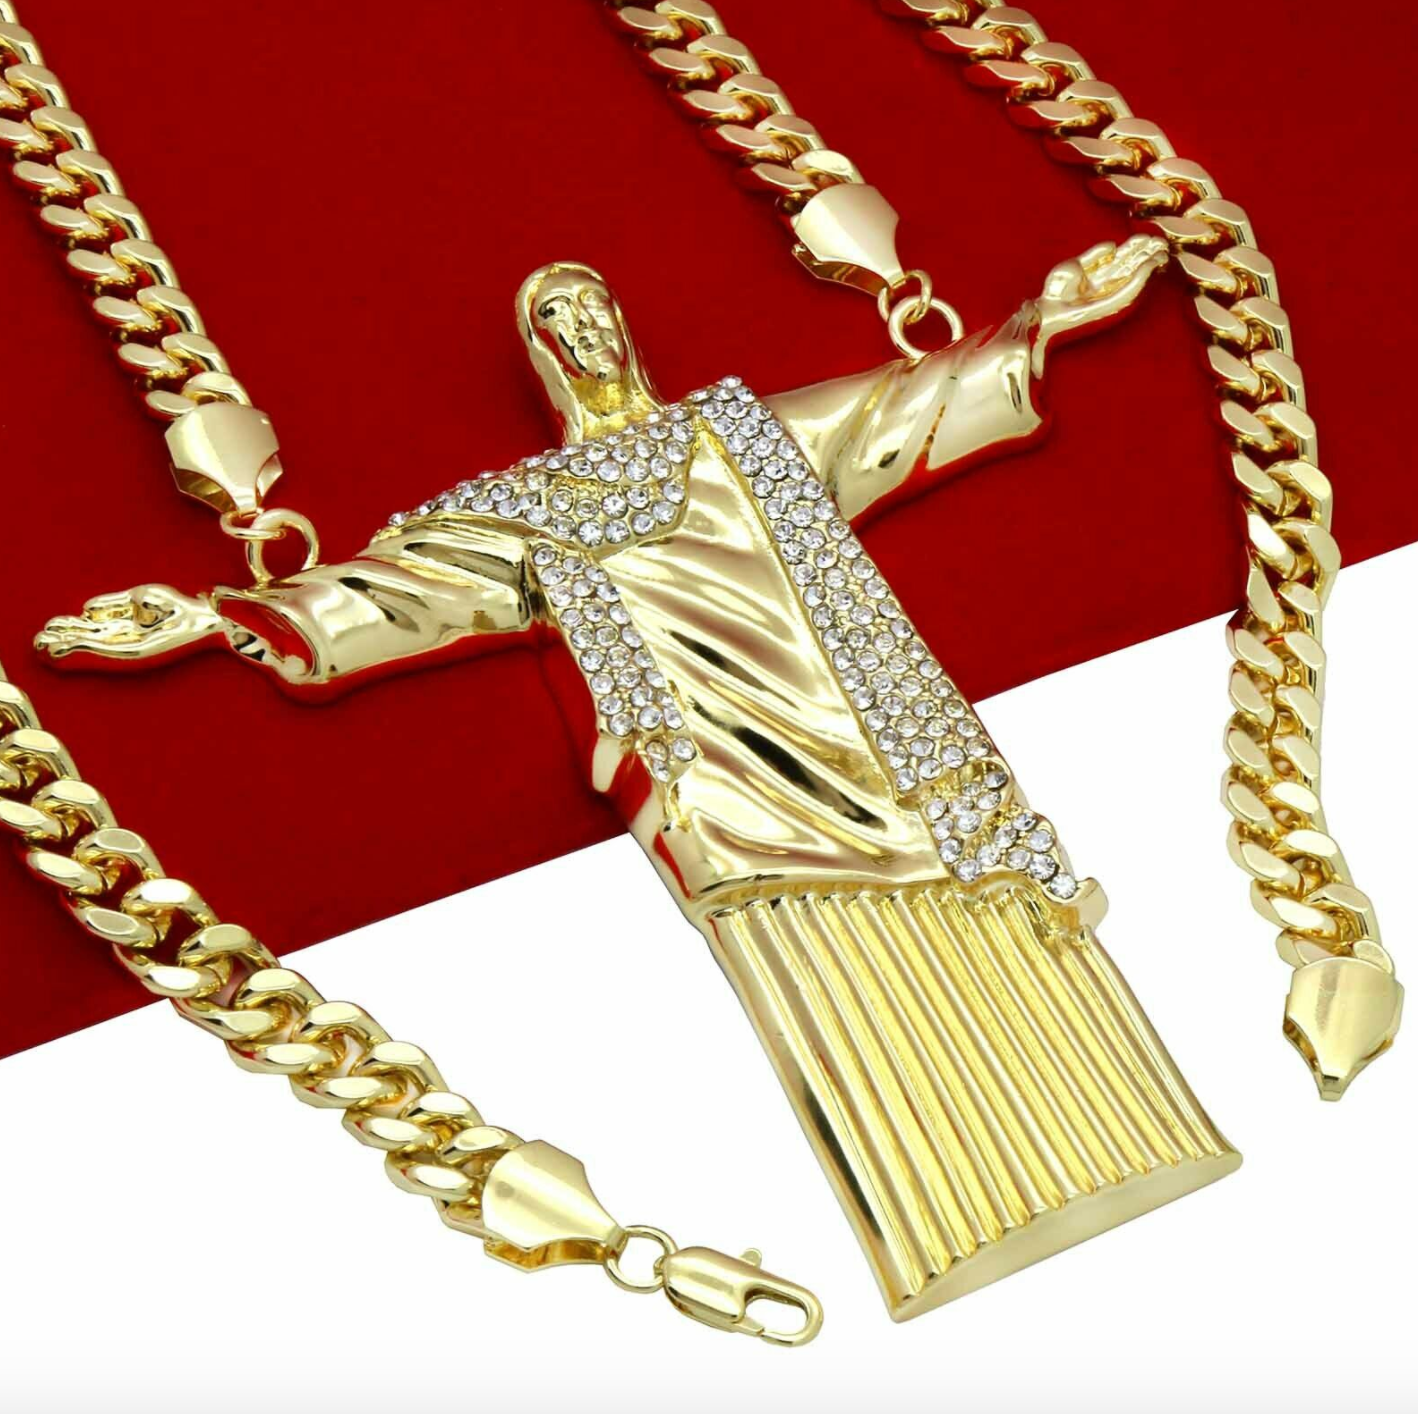 Christ The Redeemer Chain Simulated Diamond Rio de Janeiro Brazil Jesus Necklace Christ Pendant Rapper Iced Out Gold Silver Metal Alloy 30in.